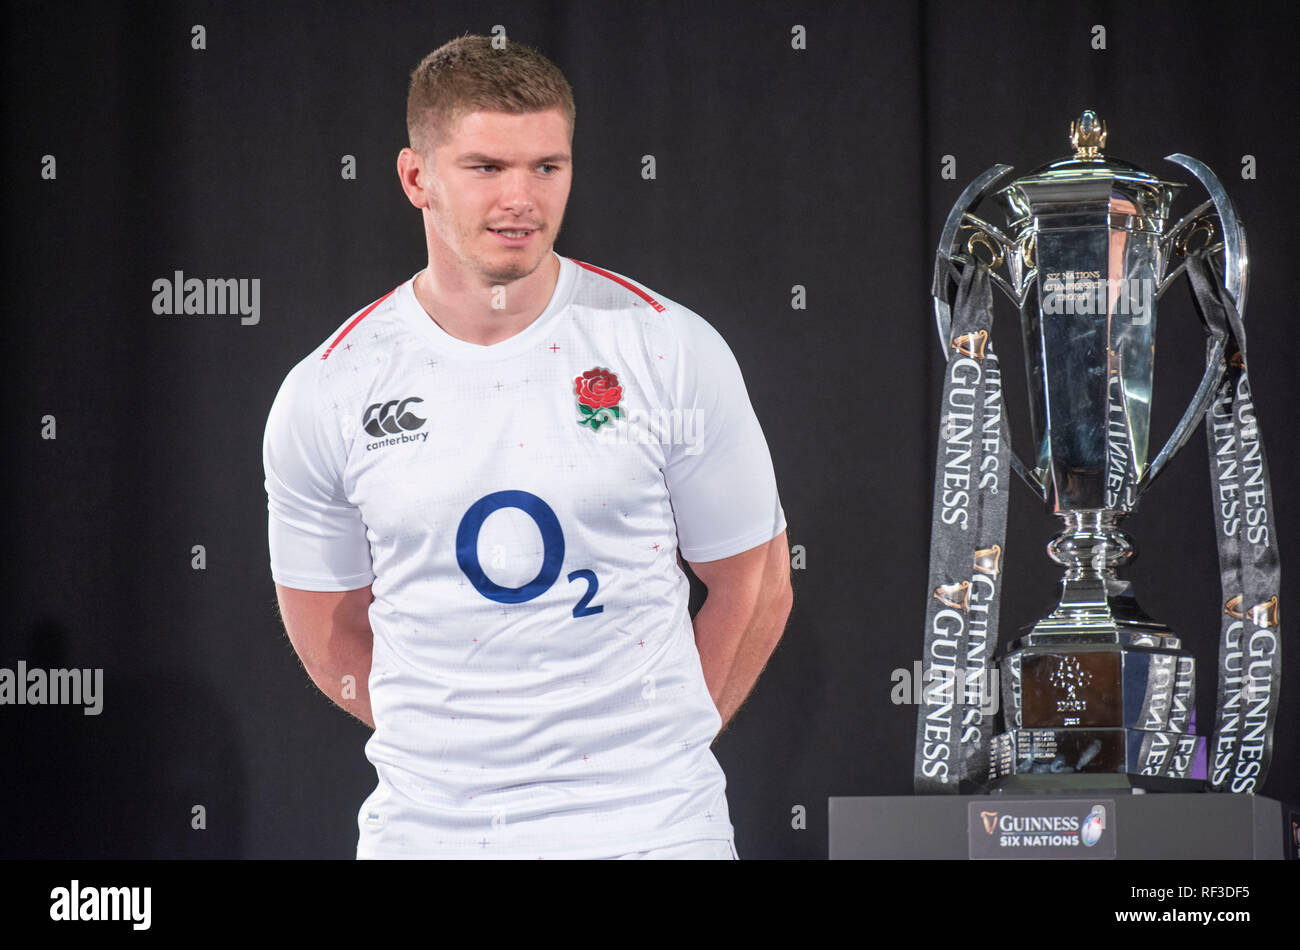 Swansea, UK. 23rd Jan, 2019. Guinness Six Nations Rugby Tournament launch at the Hurlingham Club in London - 23rd January 2019 England Rugby Captain Owen Farrell alongside the Six Nations trophy. Credit: Phil Rees/Alamy Live News Stock Photo